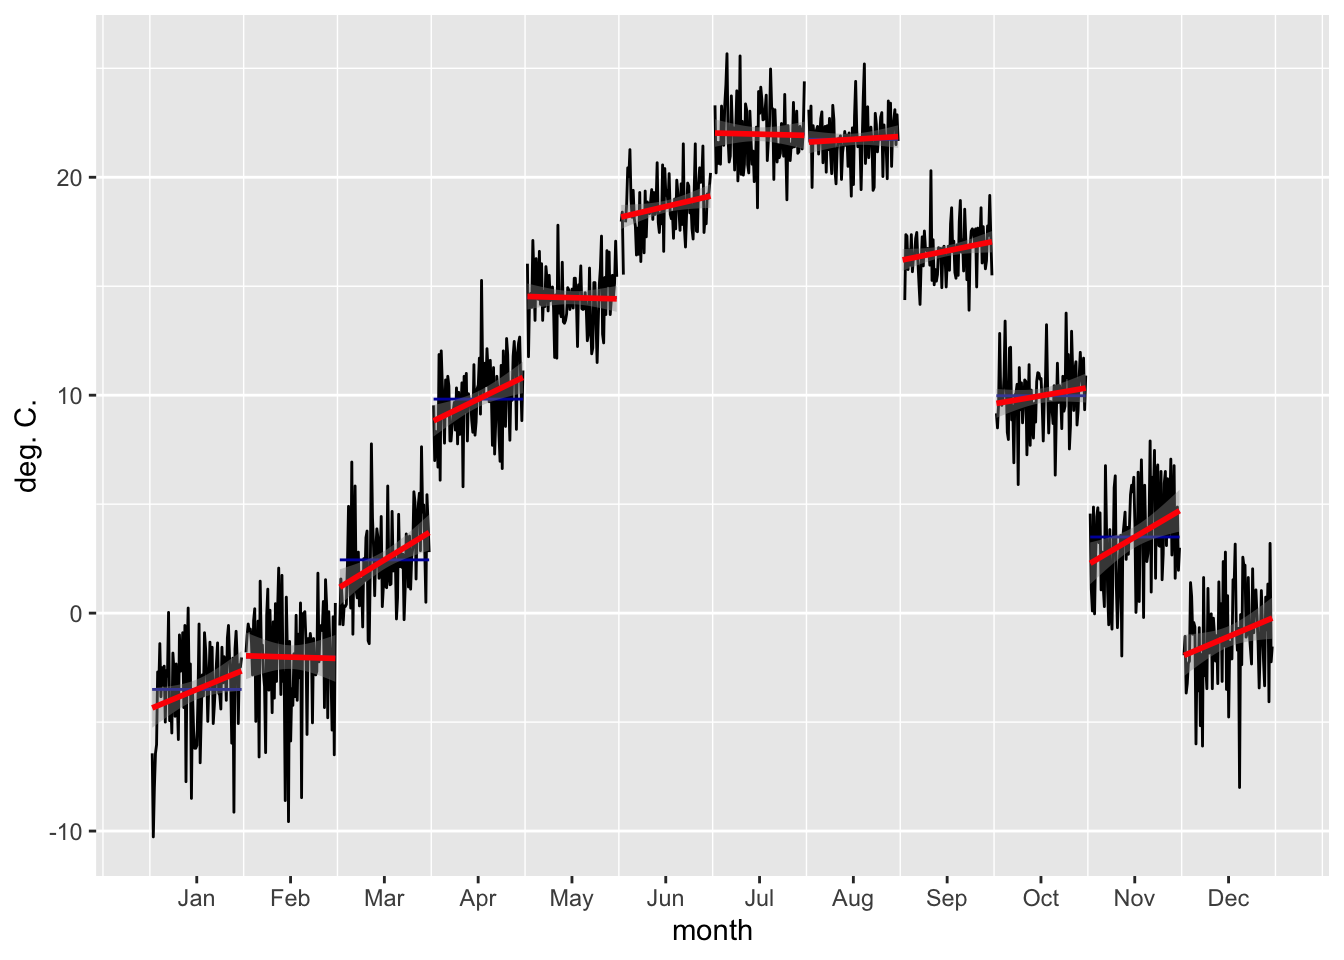 Changes in mean monthly temperatures are plotted with black lines over the entire observational record for Pskem meteorological station.The red lines are the per month best fit regression lines.